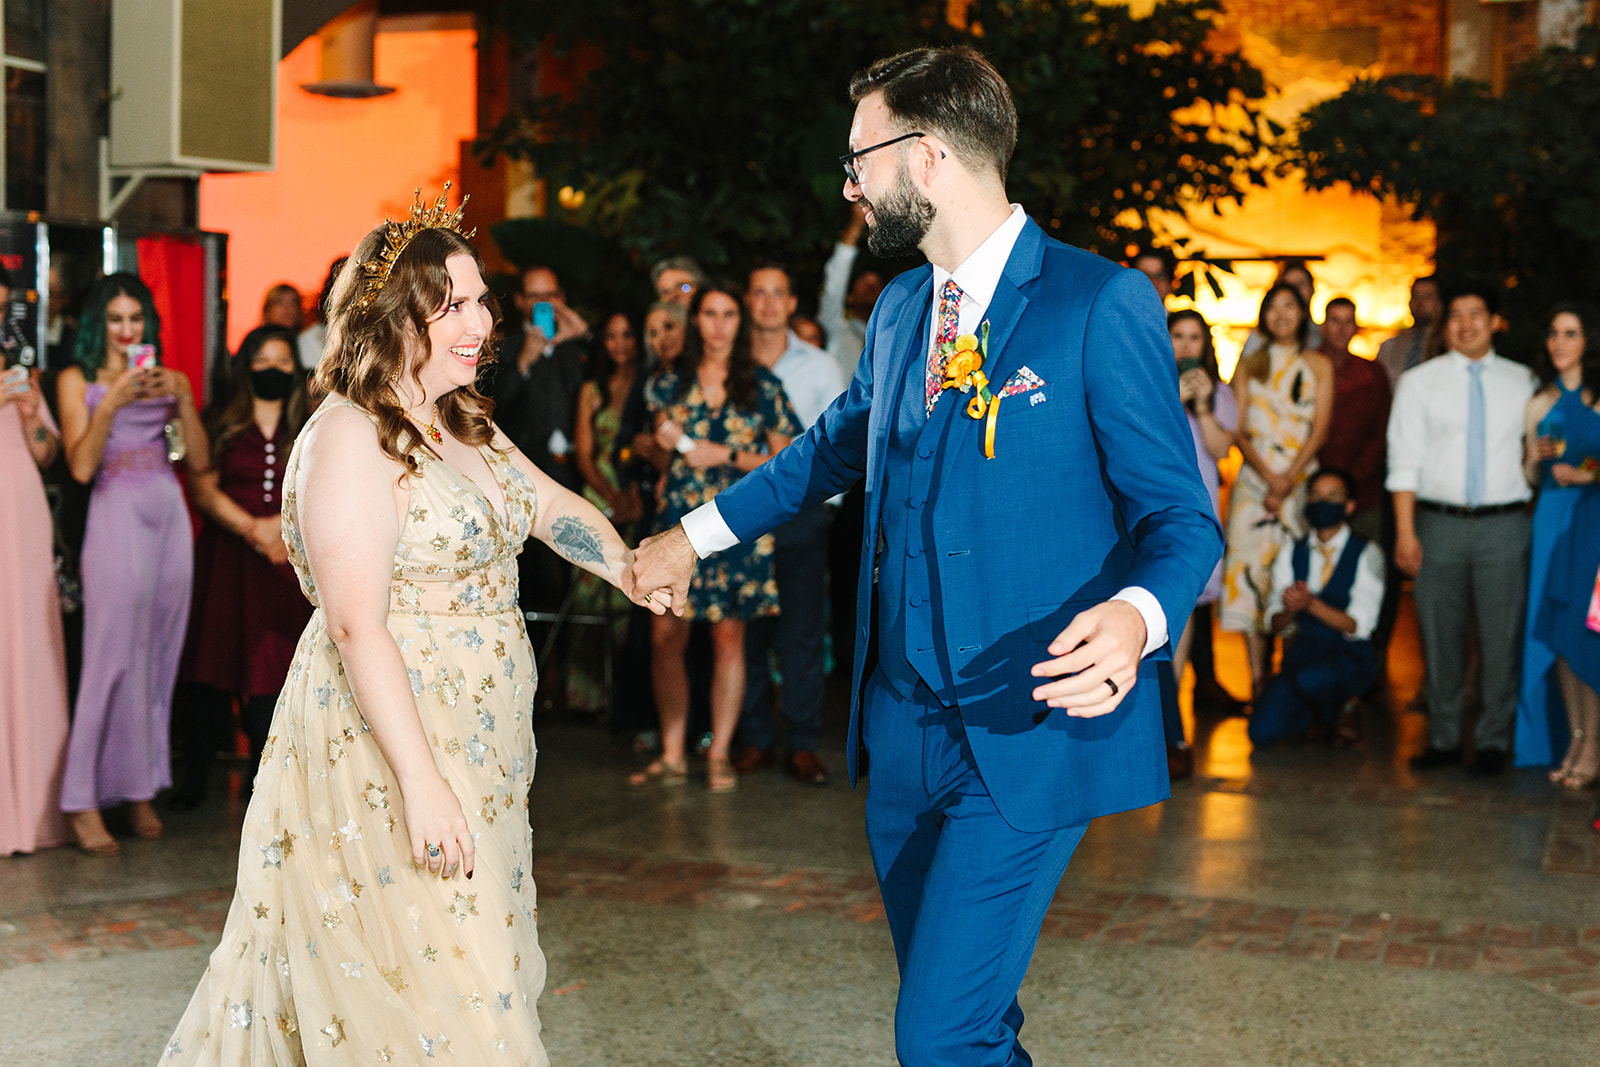 Bride and groom first dance | Colorful Downtown Los Angeles Valentine Wedding | Los Angeles wedding photographer | #losangeleswedding #colorfulwedding #DTLA #valentinedtla   Source: Mary Costa Photography | Los Angeles